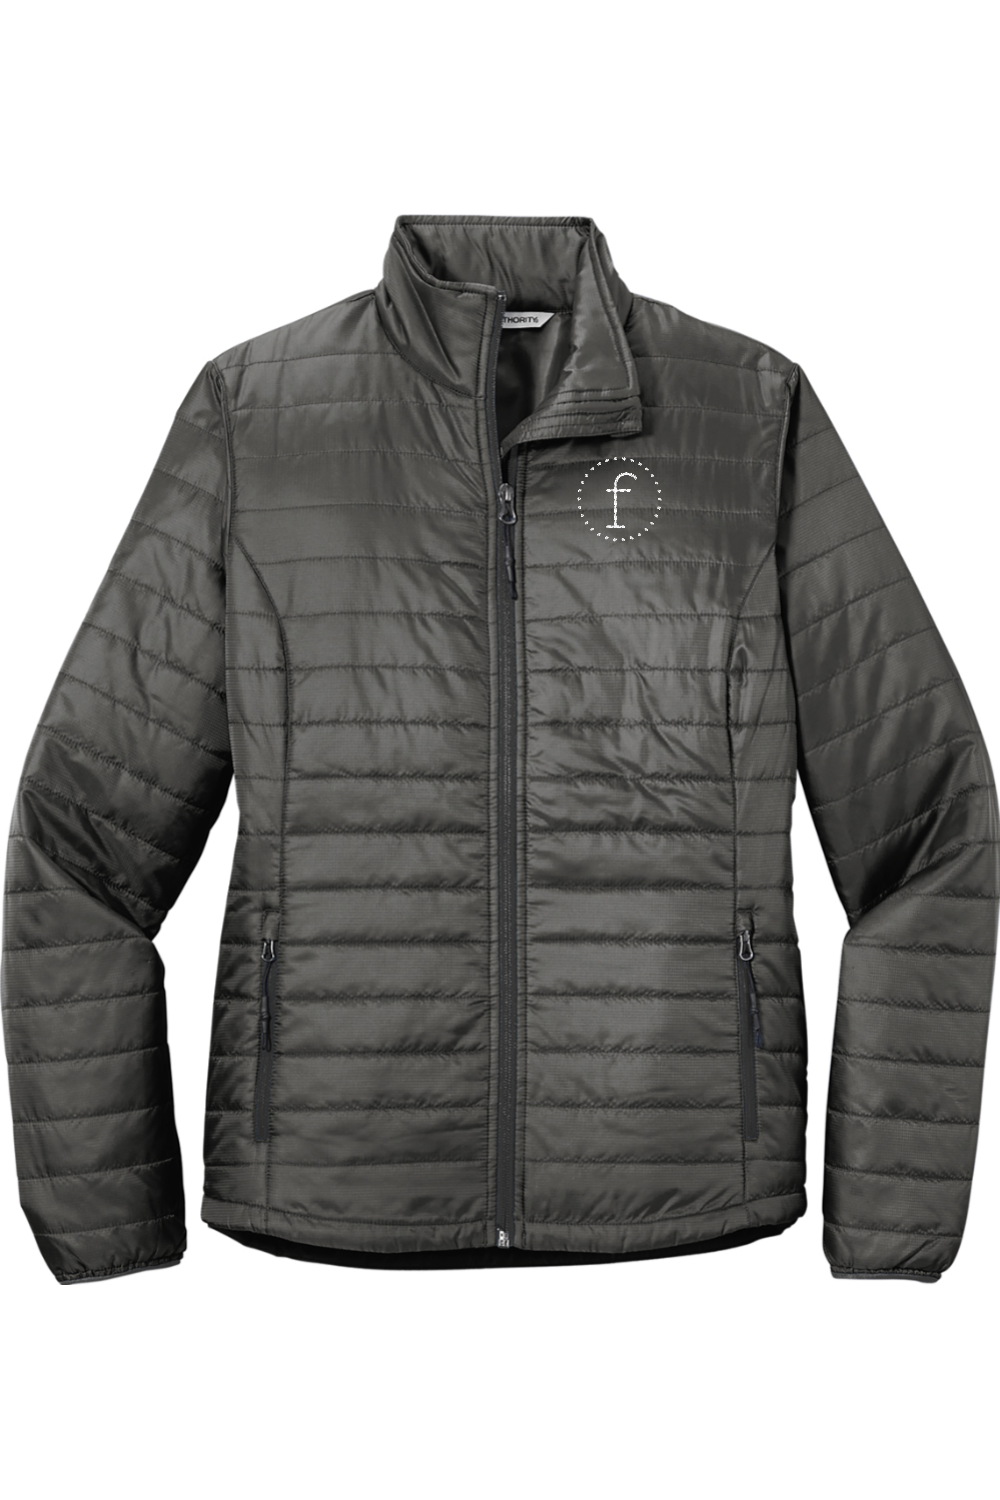 Authority Ladies Packable Puffy Jacket